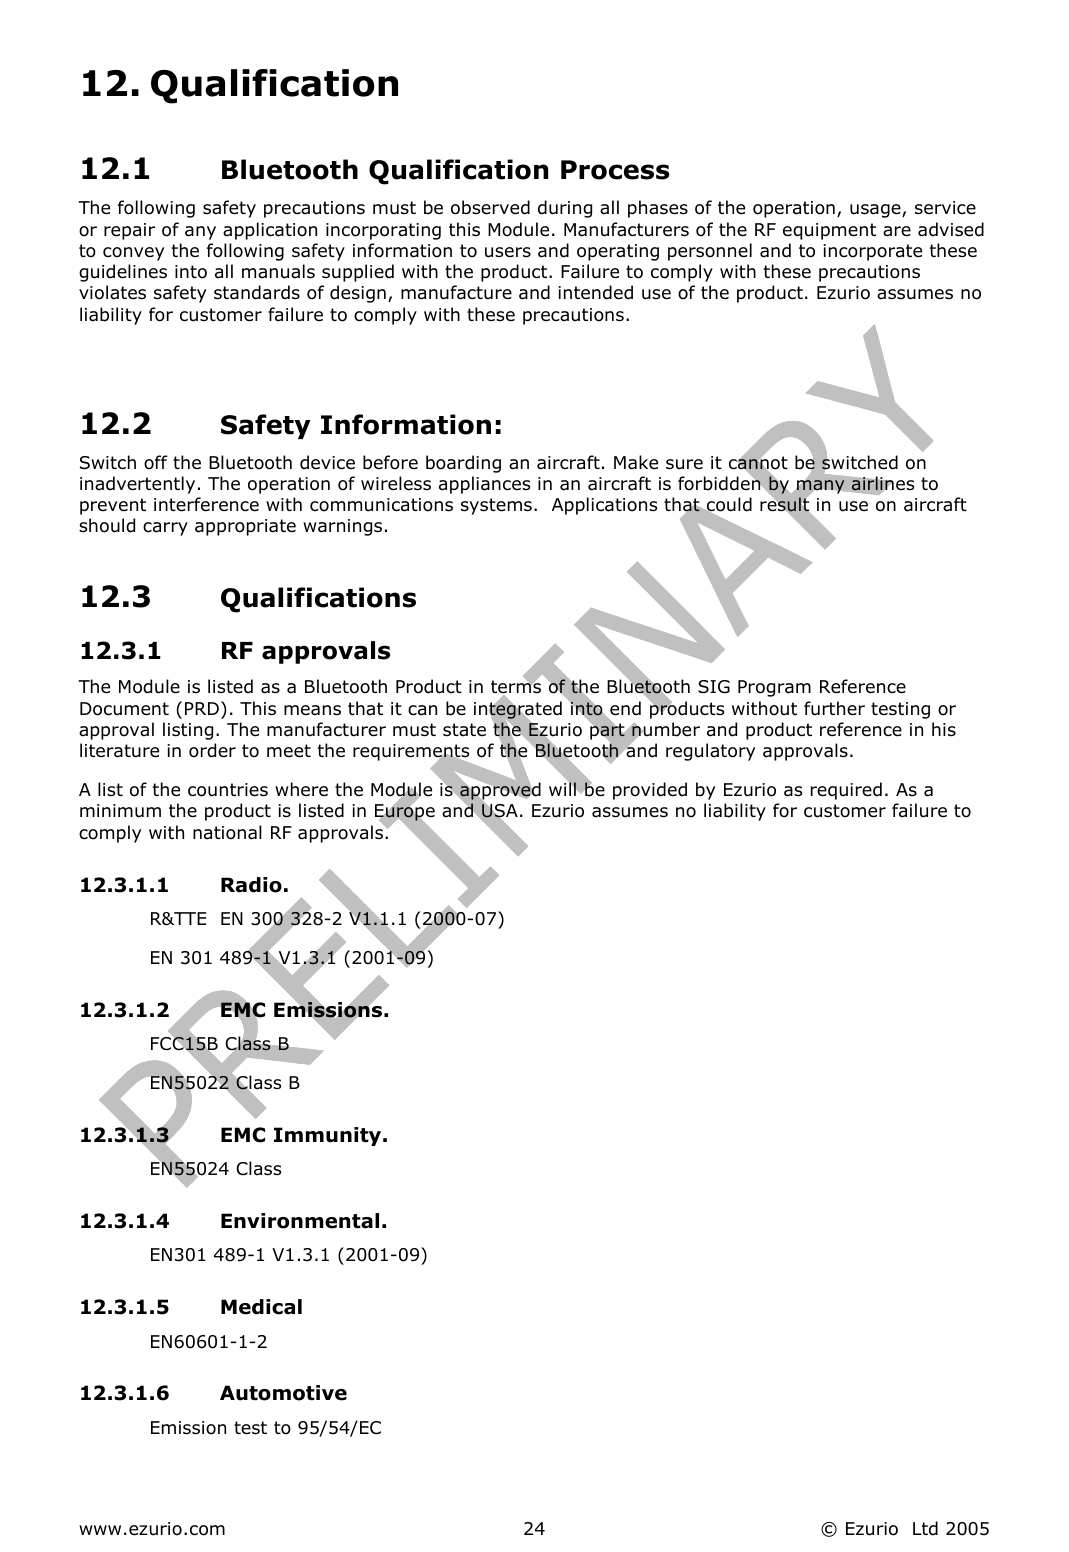  www.ezurio.com  © Ezurio  Ltd 2005 2412. Qualification  12.1  Bluetooth Qualification Process The following safety precautions must be observed during all phases of the operation, usage, service or repair of any application incorporating this Module. Manufacturers of the RF equipment are advised to convey the following safety information to users and operating personnel and to incorporate these guidelines into all manuals supplied with the product. Failure to comply with these precautions violates safety standards of design, manufacture and intended use of the product. Ezurio assumes no liability for customer failure to comply with these precautions.   12.2  Safety Information: Switch off the Bluetooth device before boarding an aircraft. Make sure it cannot be switched on inadvertently. The operation of wireless appliances in an aircraft is forbidden by many airlines to prevent interference with communications systems.  Applications that could result in use on aircraft should carry appropriate warnings. 12.3  Qualifications 12.3.1 RF approvals The Module is listed as a Bluetooth Product in terms of the Bluetooth SIG Program Reference Document (PRD). This means that it can be integrated into end products without further testing or approval listing. The manufacturer must state the Ezurio part number and product reference in his literature in order to meet the requirements of the Bluetooth and regulatory approvals. A list of the countries where the Module is approved will be provided by Ezurio as required. As a minimum the product is listed in Europe and USA. Ezurio assumes no liability for customer failure to comply with national RF approvals.  12.3.1.1 Radio. R&amp;TTE  EN 300 328-2 V1.1.1 (2000-07) EN 301 489-1 V1.3.1 (2001-09) 12.3.1.2 EMC Emissions. FCC15B Class B EN55022 Class B 12.3.1.3 EMC Immunity. EN55024 Class 12.3.1.4 Environmental. EN301 489-1 V1.3.1 (2001-09) 12.3.1.5 Medical EN60601-1-2 12.3.1.6 Automotive Emission test to 95/54/EC 